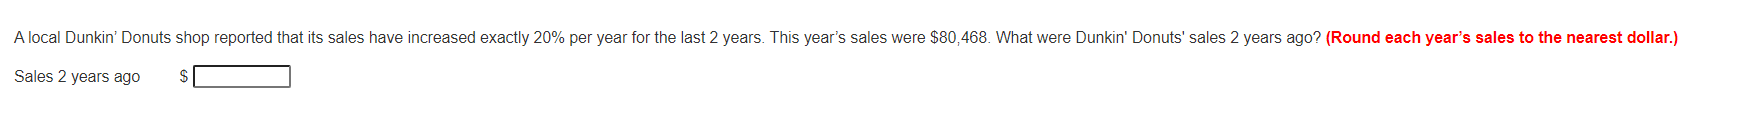 A local Dunkin' Donuts shop reported that its sales have increased exactly 20% per year for the last 2 years. This year's sales were $80,468. What were Dunkin' Donuts' sales 2 years ago? (Round each year's sales to the nearest dollar.)
Sales 2 years ago
$
